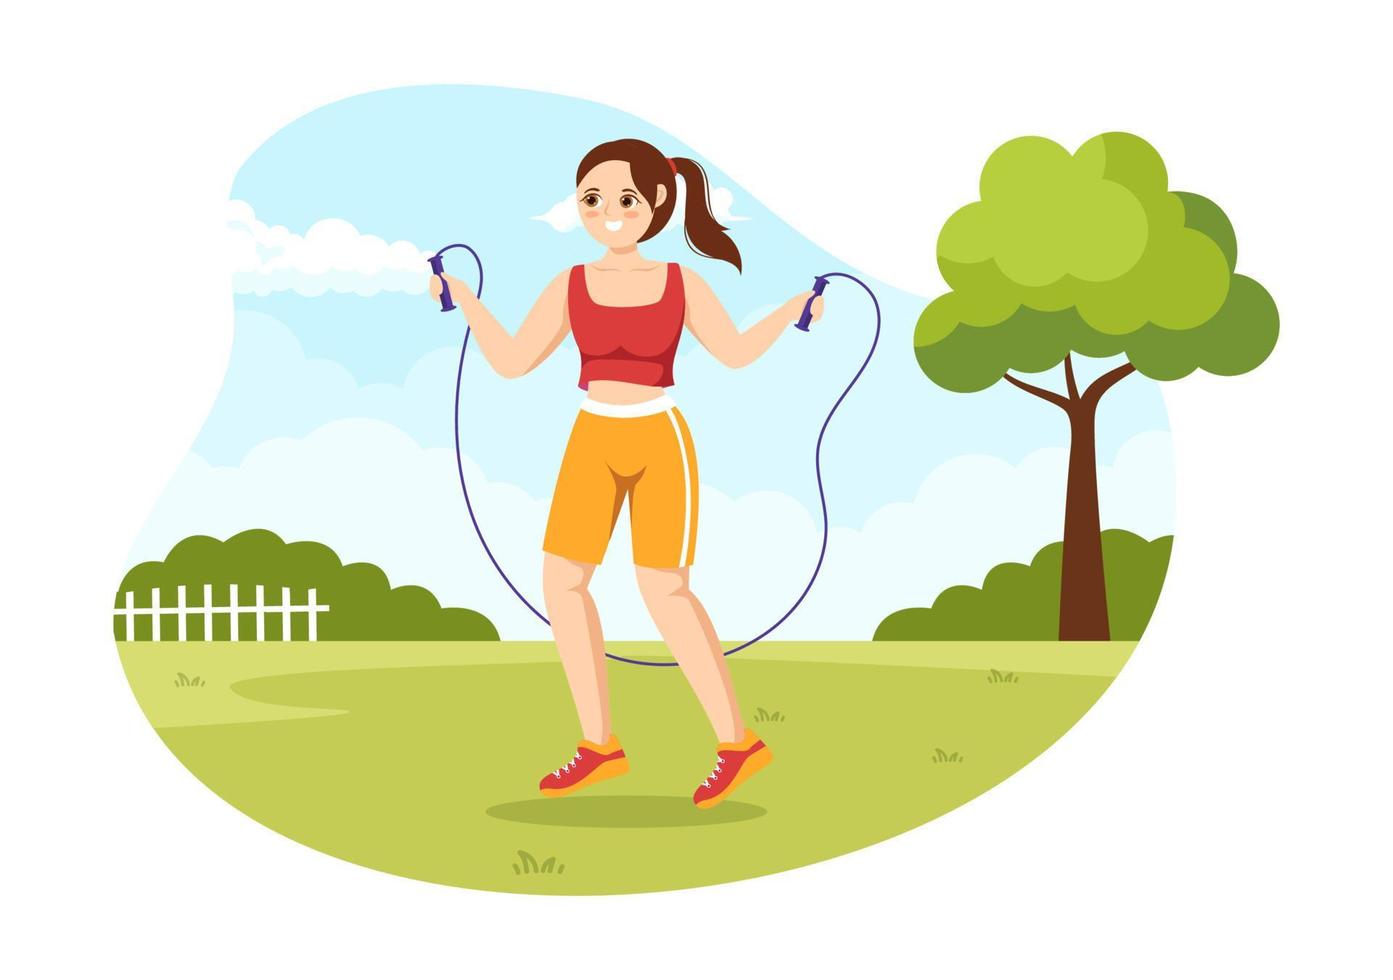 Jump Rope Illustration with People Playing Skipping Wear Sportswear in Indoor Fitness Sport Activities Flat Cartoon Hand Drawn Templates vector